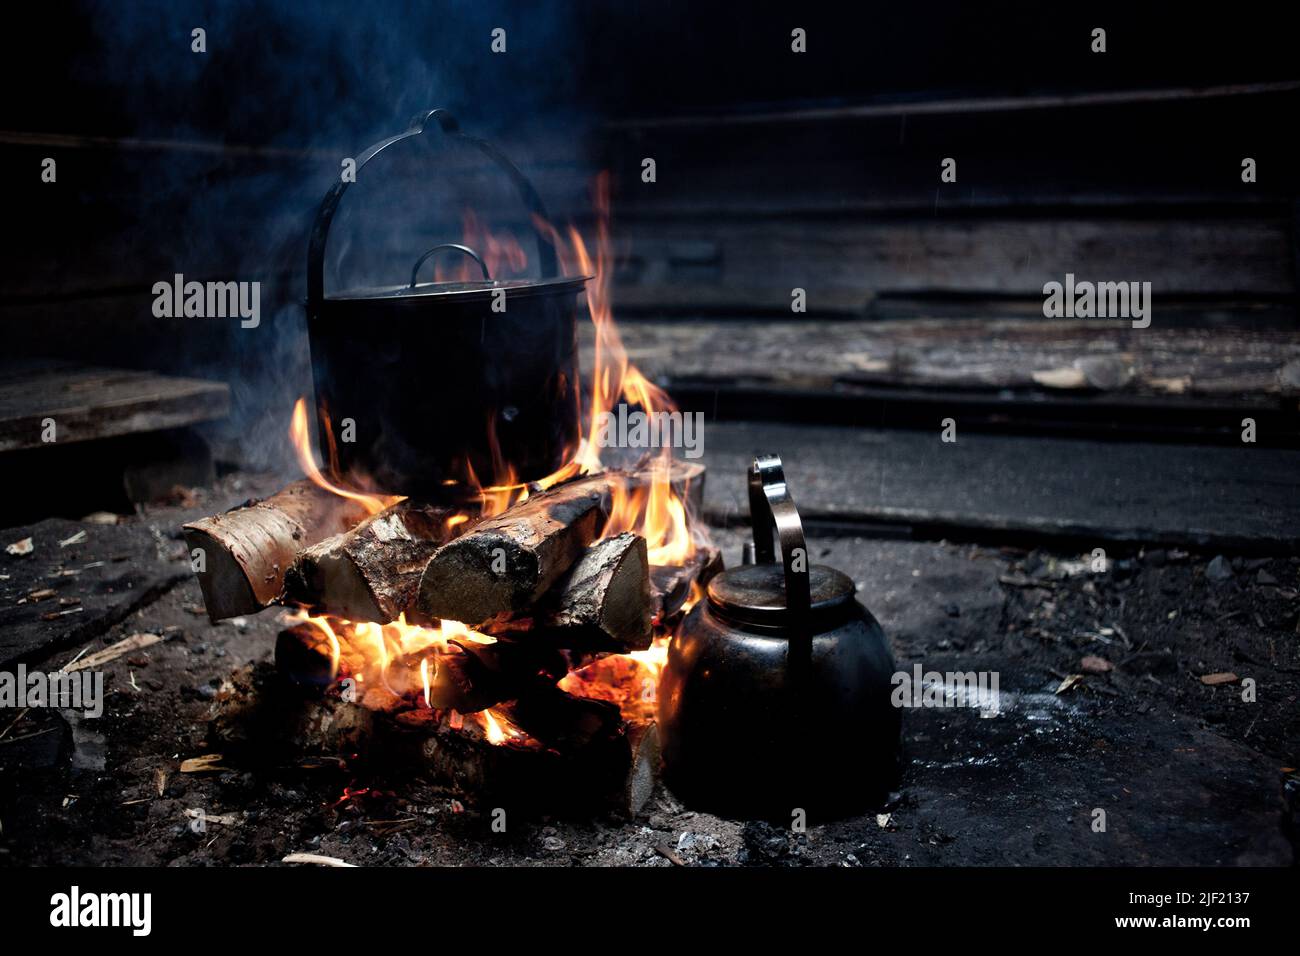 https://c8.alamy.com/comp/2JF2137/a-closeup-shot-of-a-pot-on-burning-firewood-and-a-tea-kettle-on-a-camp-site-2JF2137.jpg